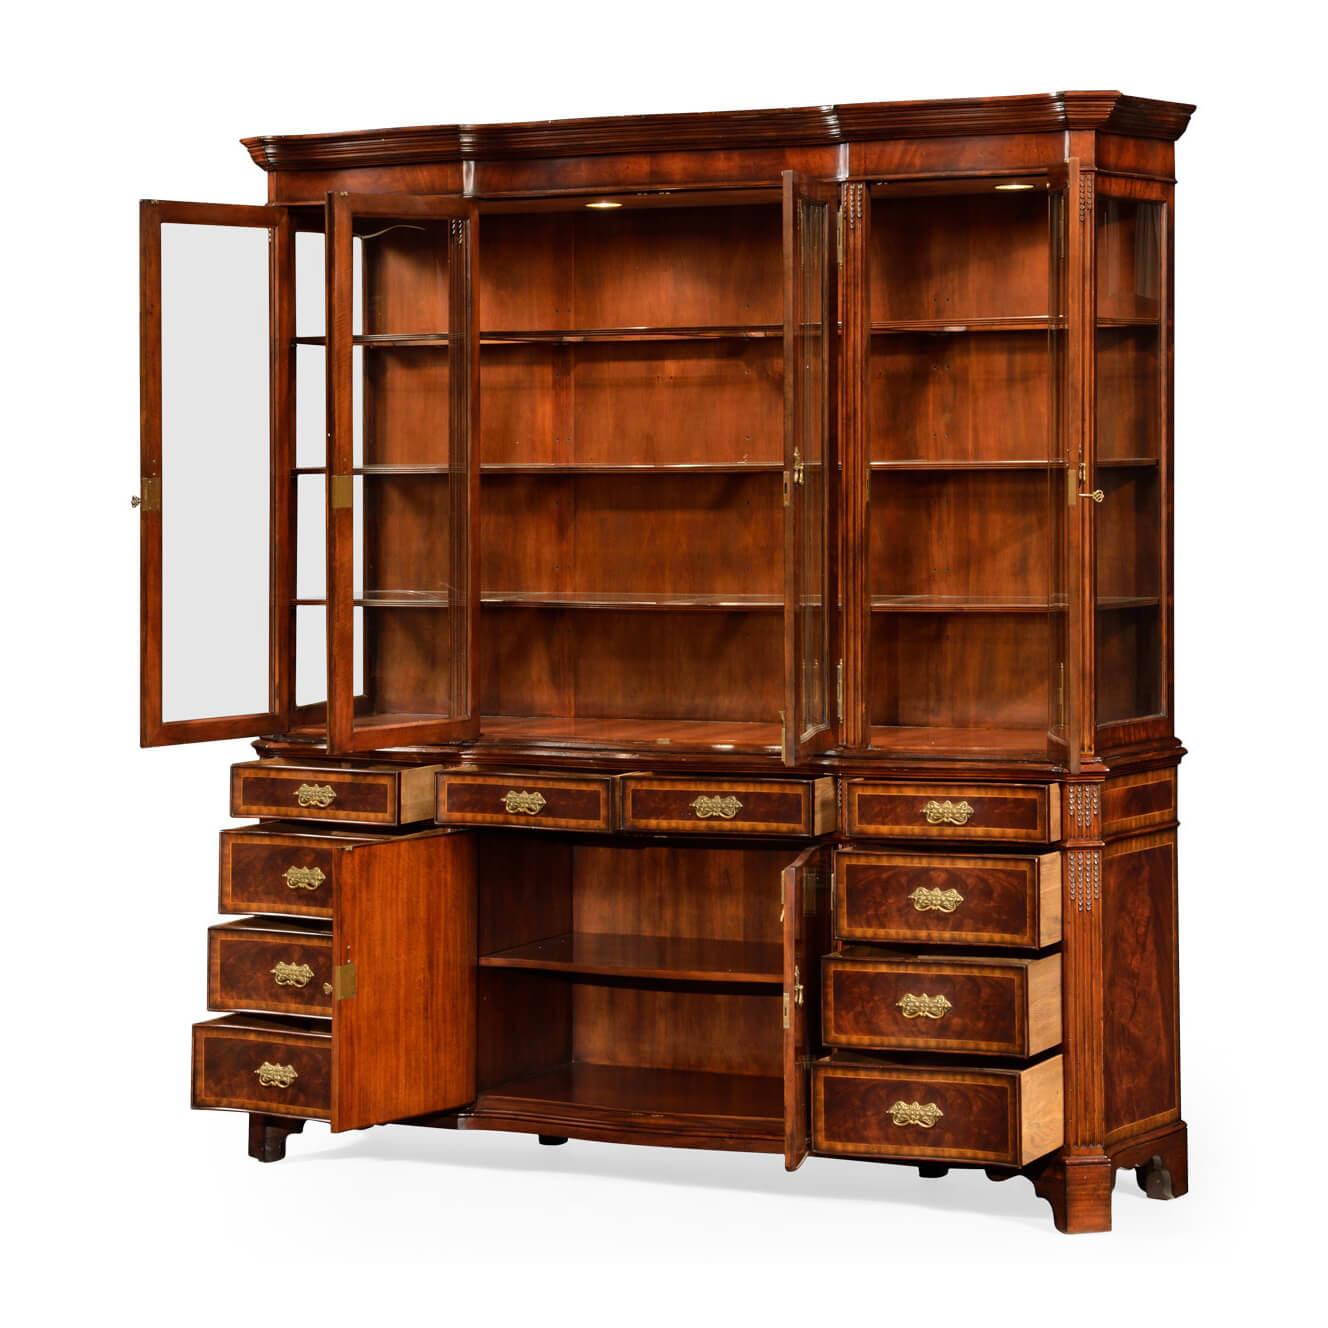 Large double fronted crotch mahogany and crossbanded china cabinet, the serpentine architrave followed by the curve of the glass below in the four doors. Adjustable glass inset shelving within. Range sensitive lighting with touch-controlled dimmer.